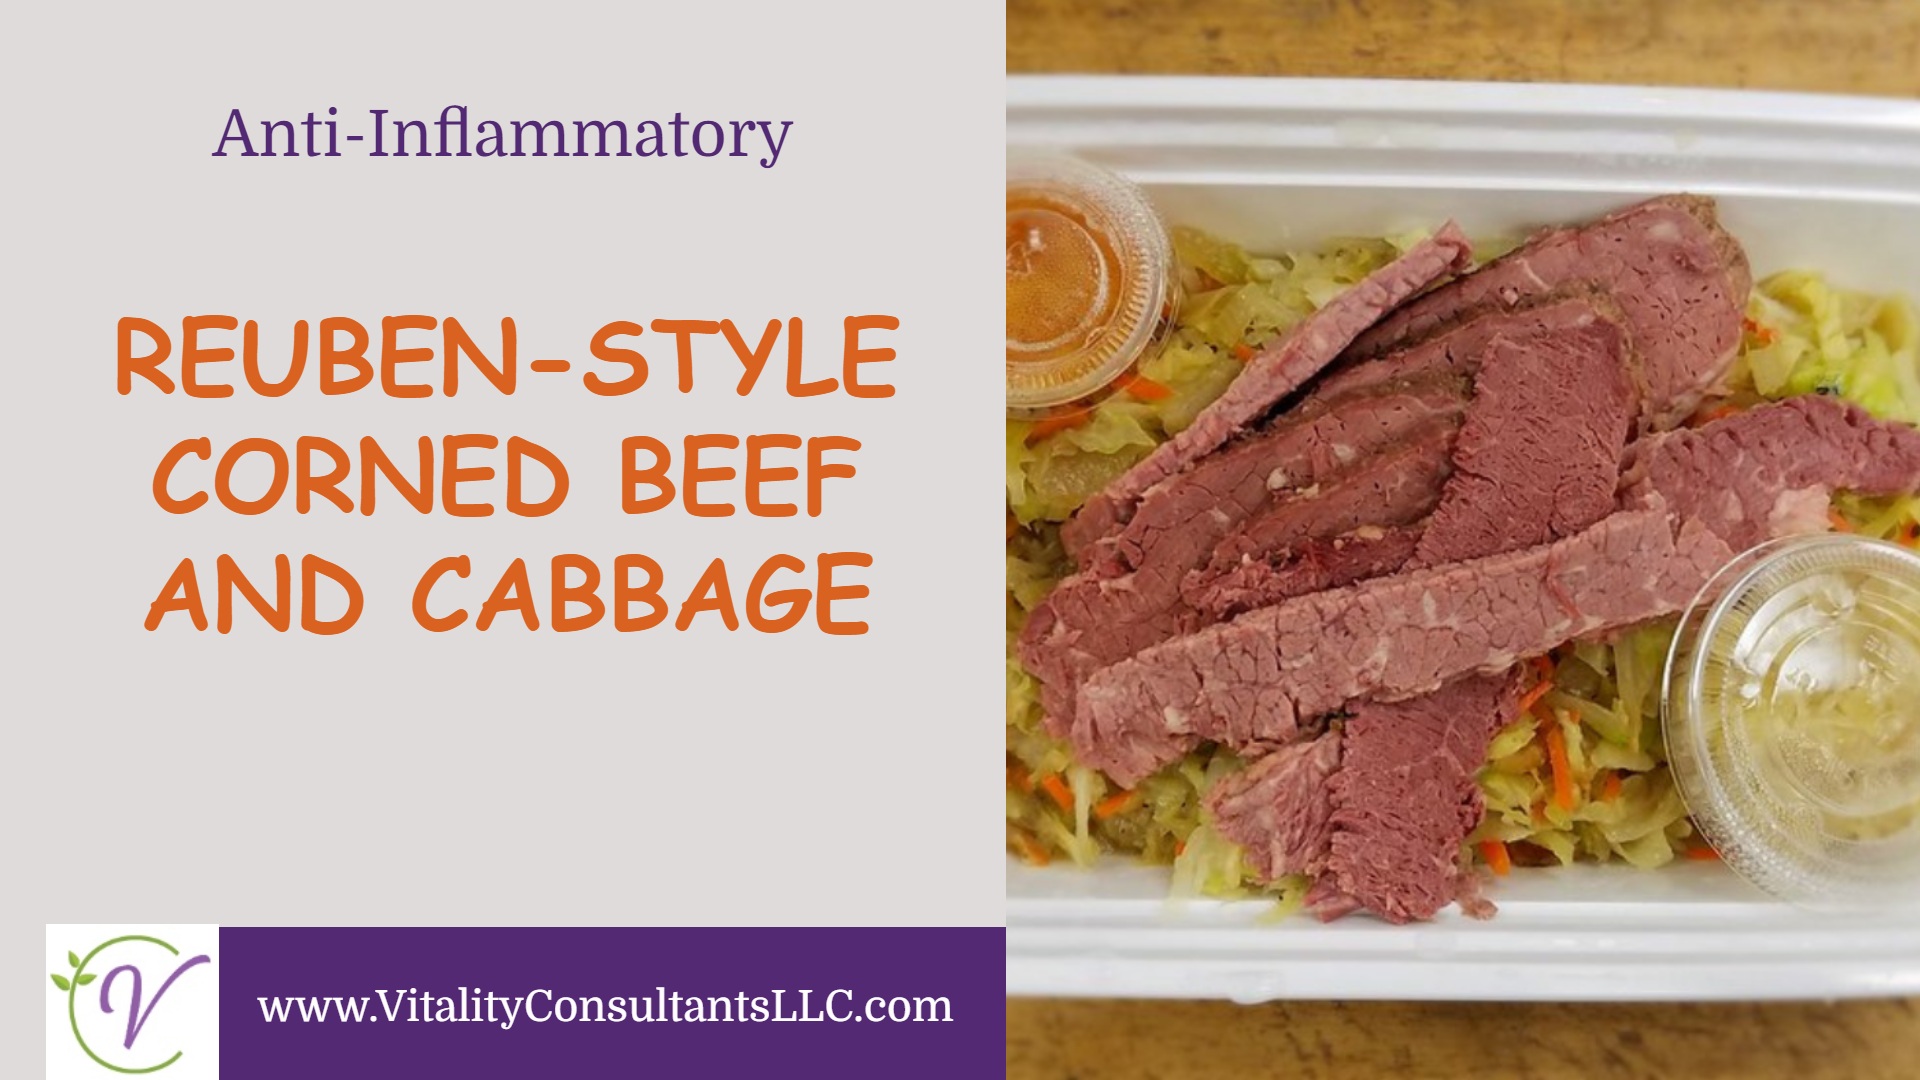 Reubne-Style Corned Beef